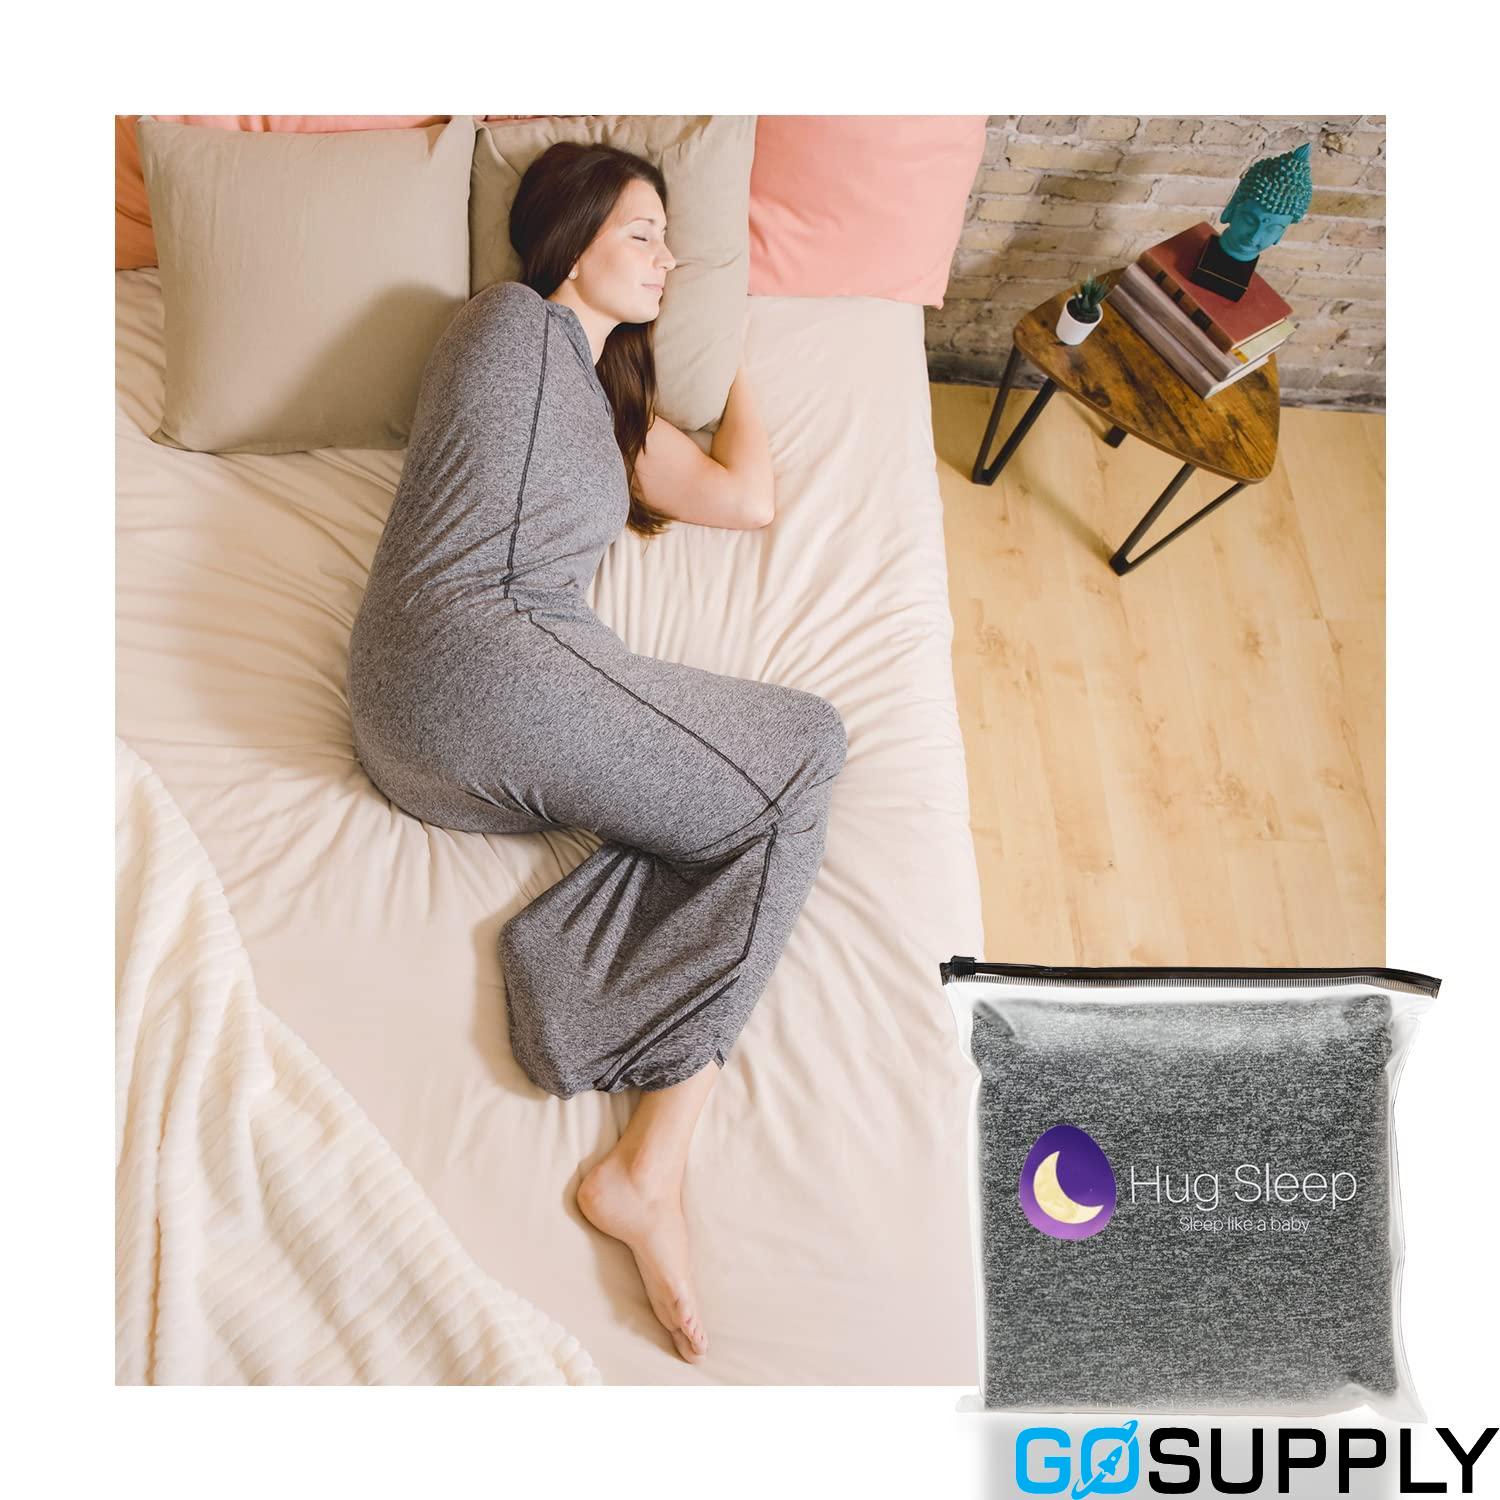 Weighted Blanket Adults x1